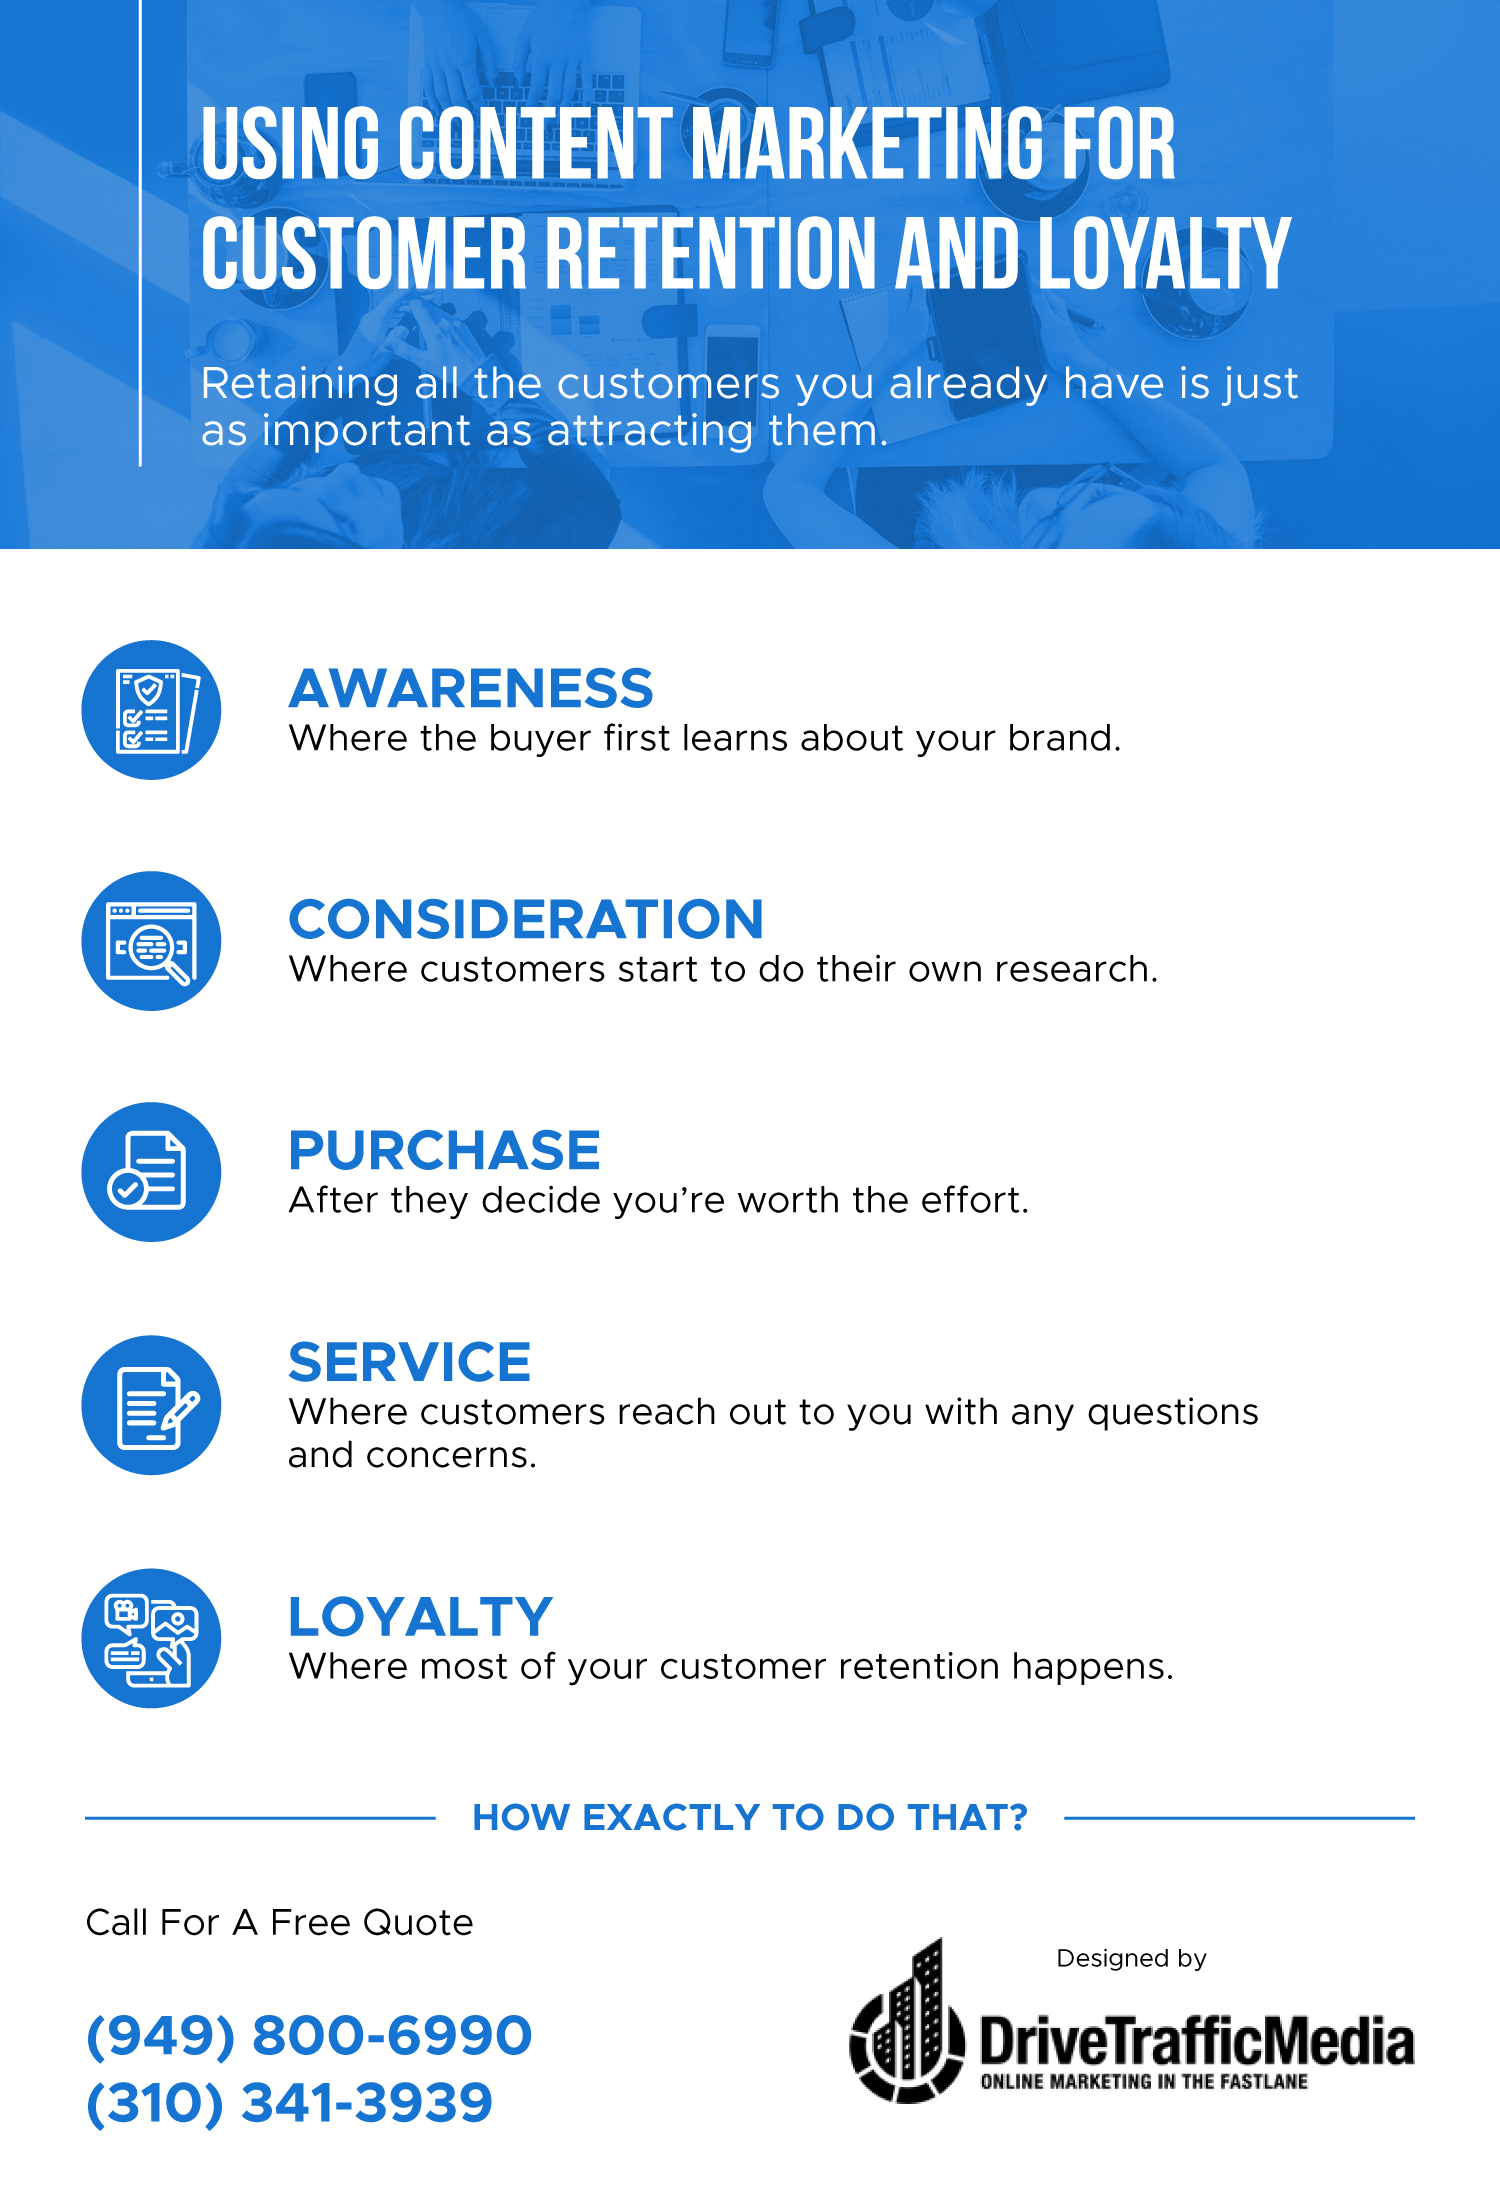 Using Content Marketing for Customer Retention and Loyalty